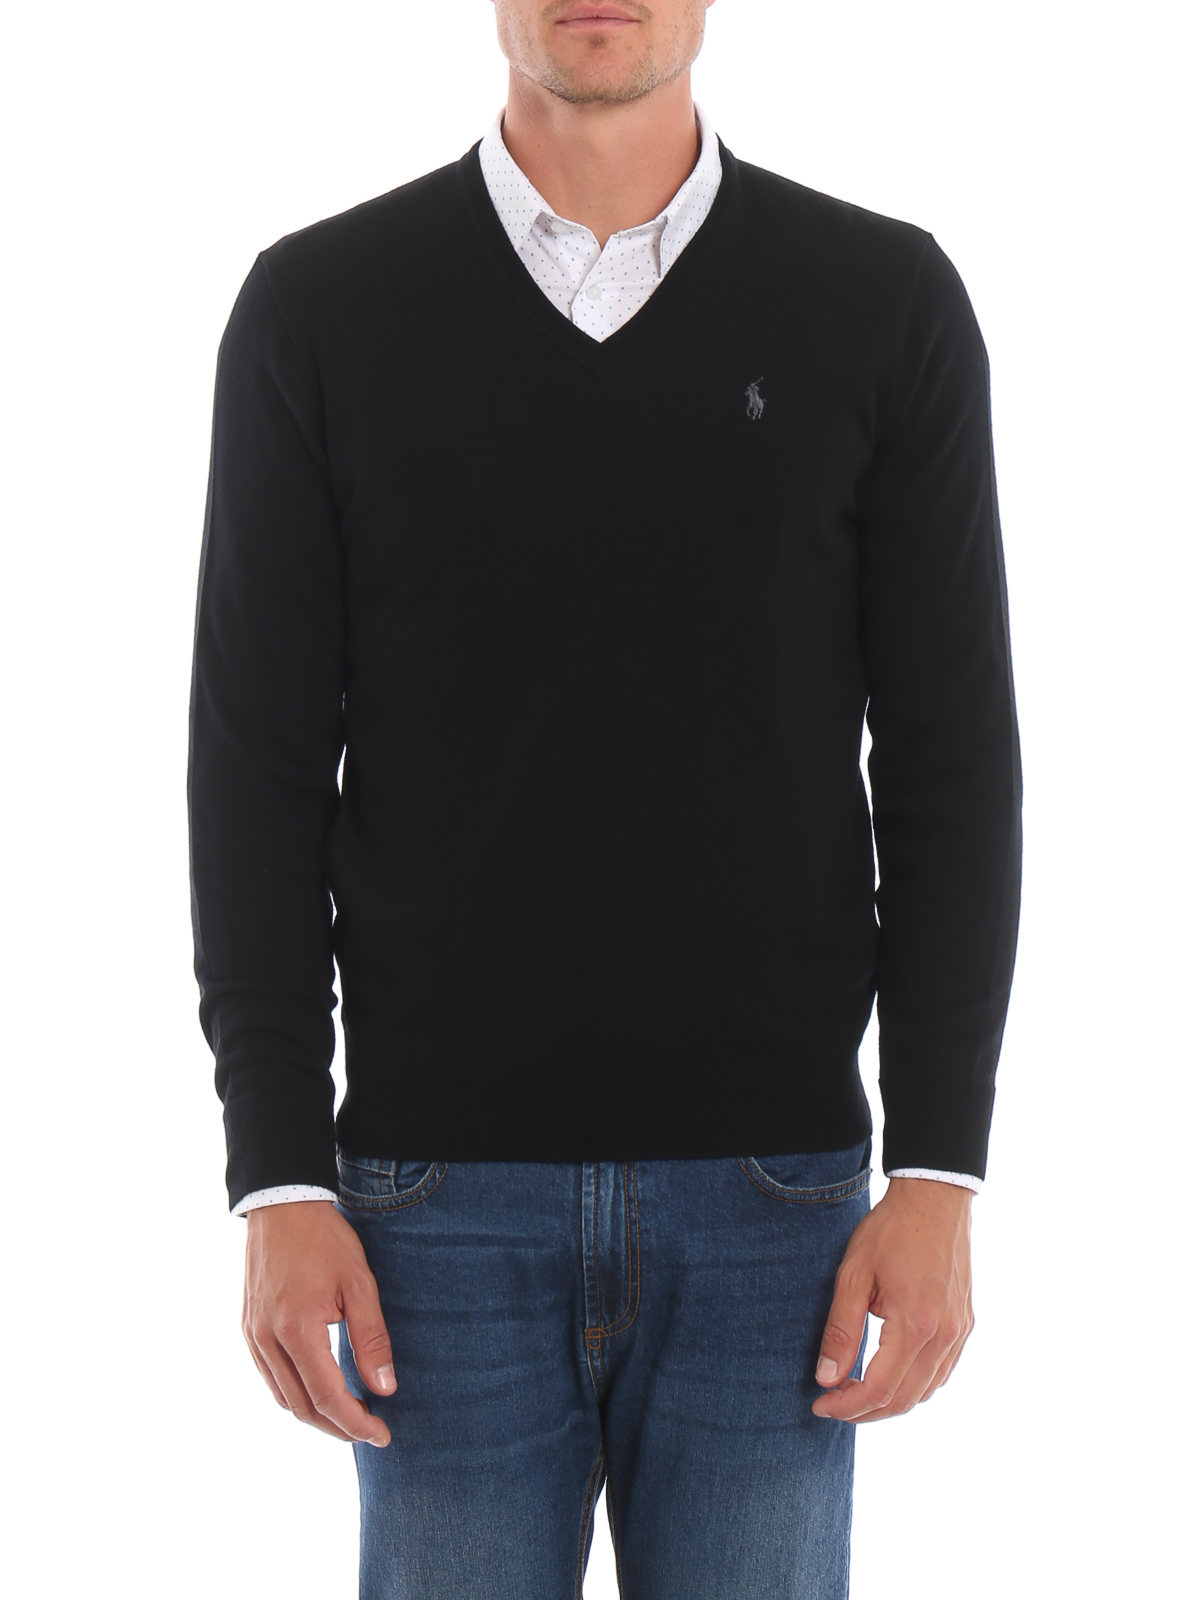 polo v neck sweaters